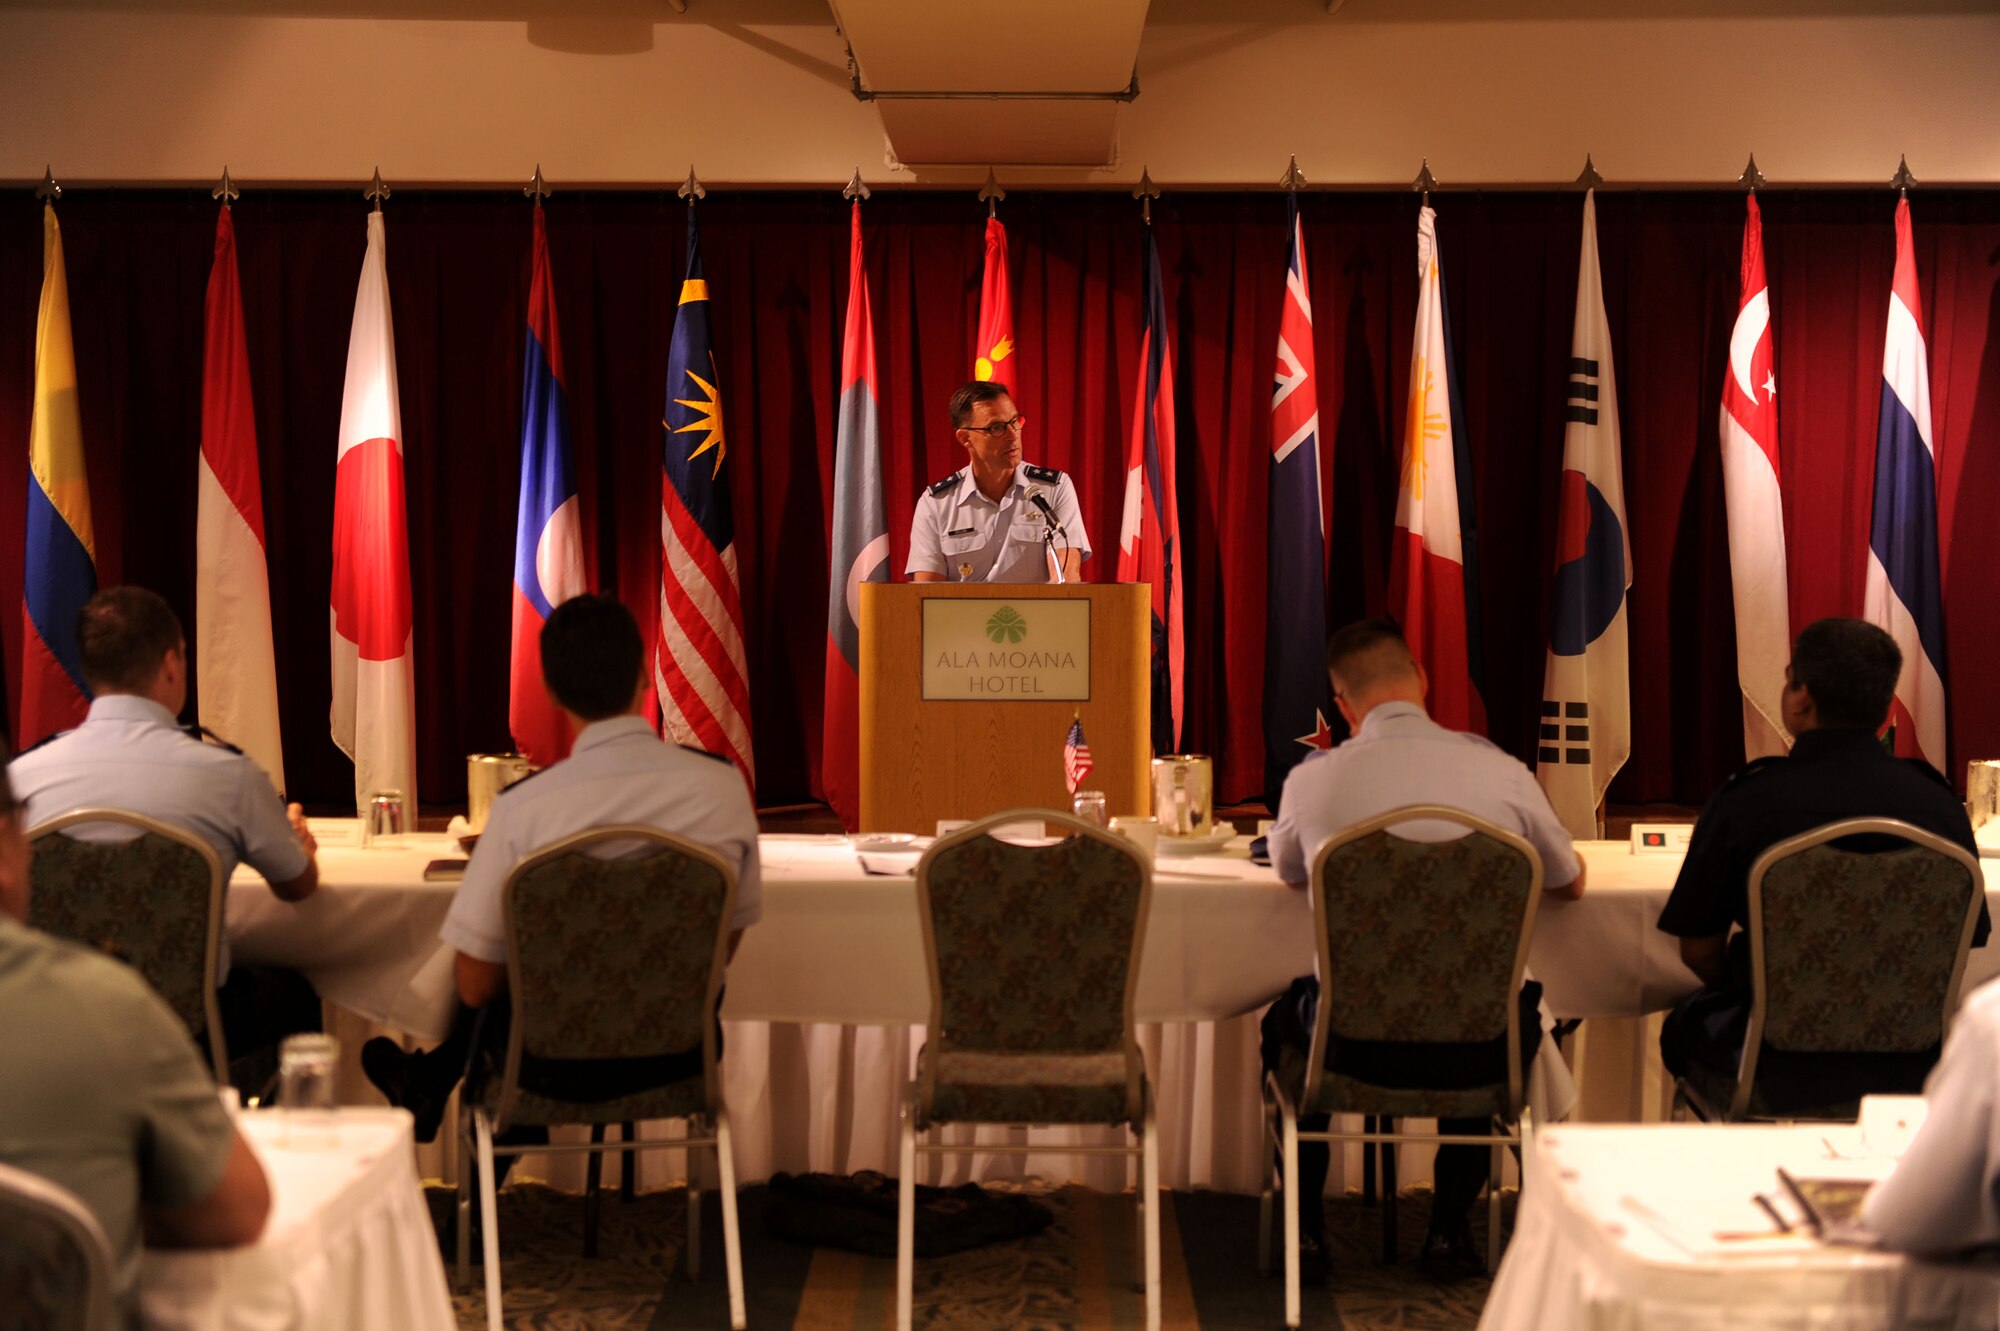 Maj. Gen. Mark Dillon, Pacific Air Forces vice commander, gives opening remarks during the Pacific Rim Airpower Symposium Sept. 22, 2015, in Honolulu, Hawaii. Senior officer and enlisted airmen from nations throughout the Indo-Asia-Pacific region attended the symposium to discuss ways to improve cooperation, leadership and coordination efforts. (U.S. Air Force photo by Staff Sgt. Alexander Martinez/Released)